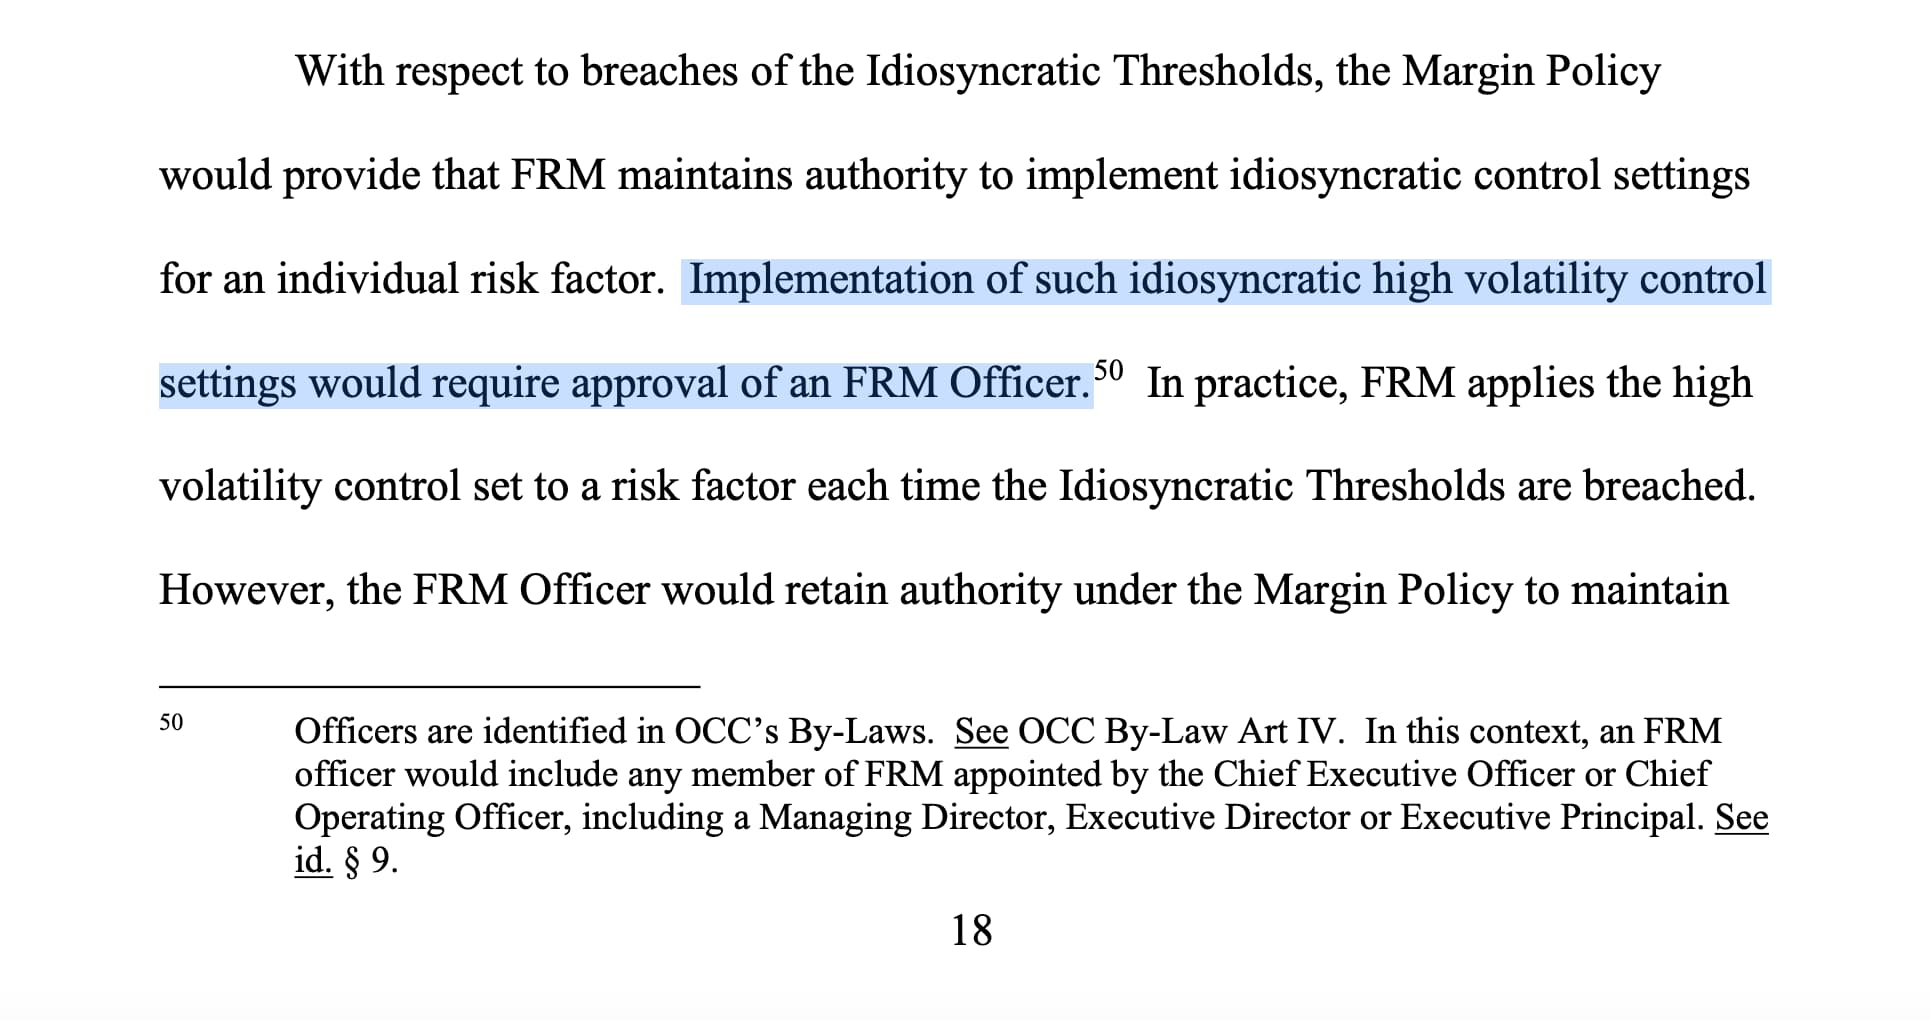 EXTRACT FROM PAGE 18 OF THE OCC RULE PROPOSAL DISCUSSING THE FRM OFFICER 